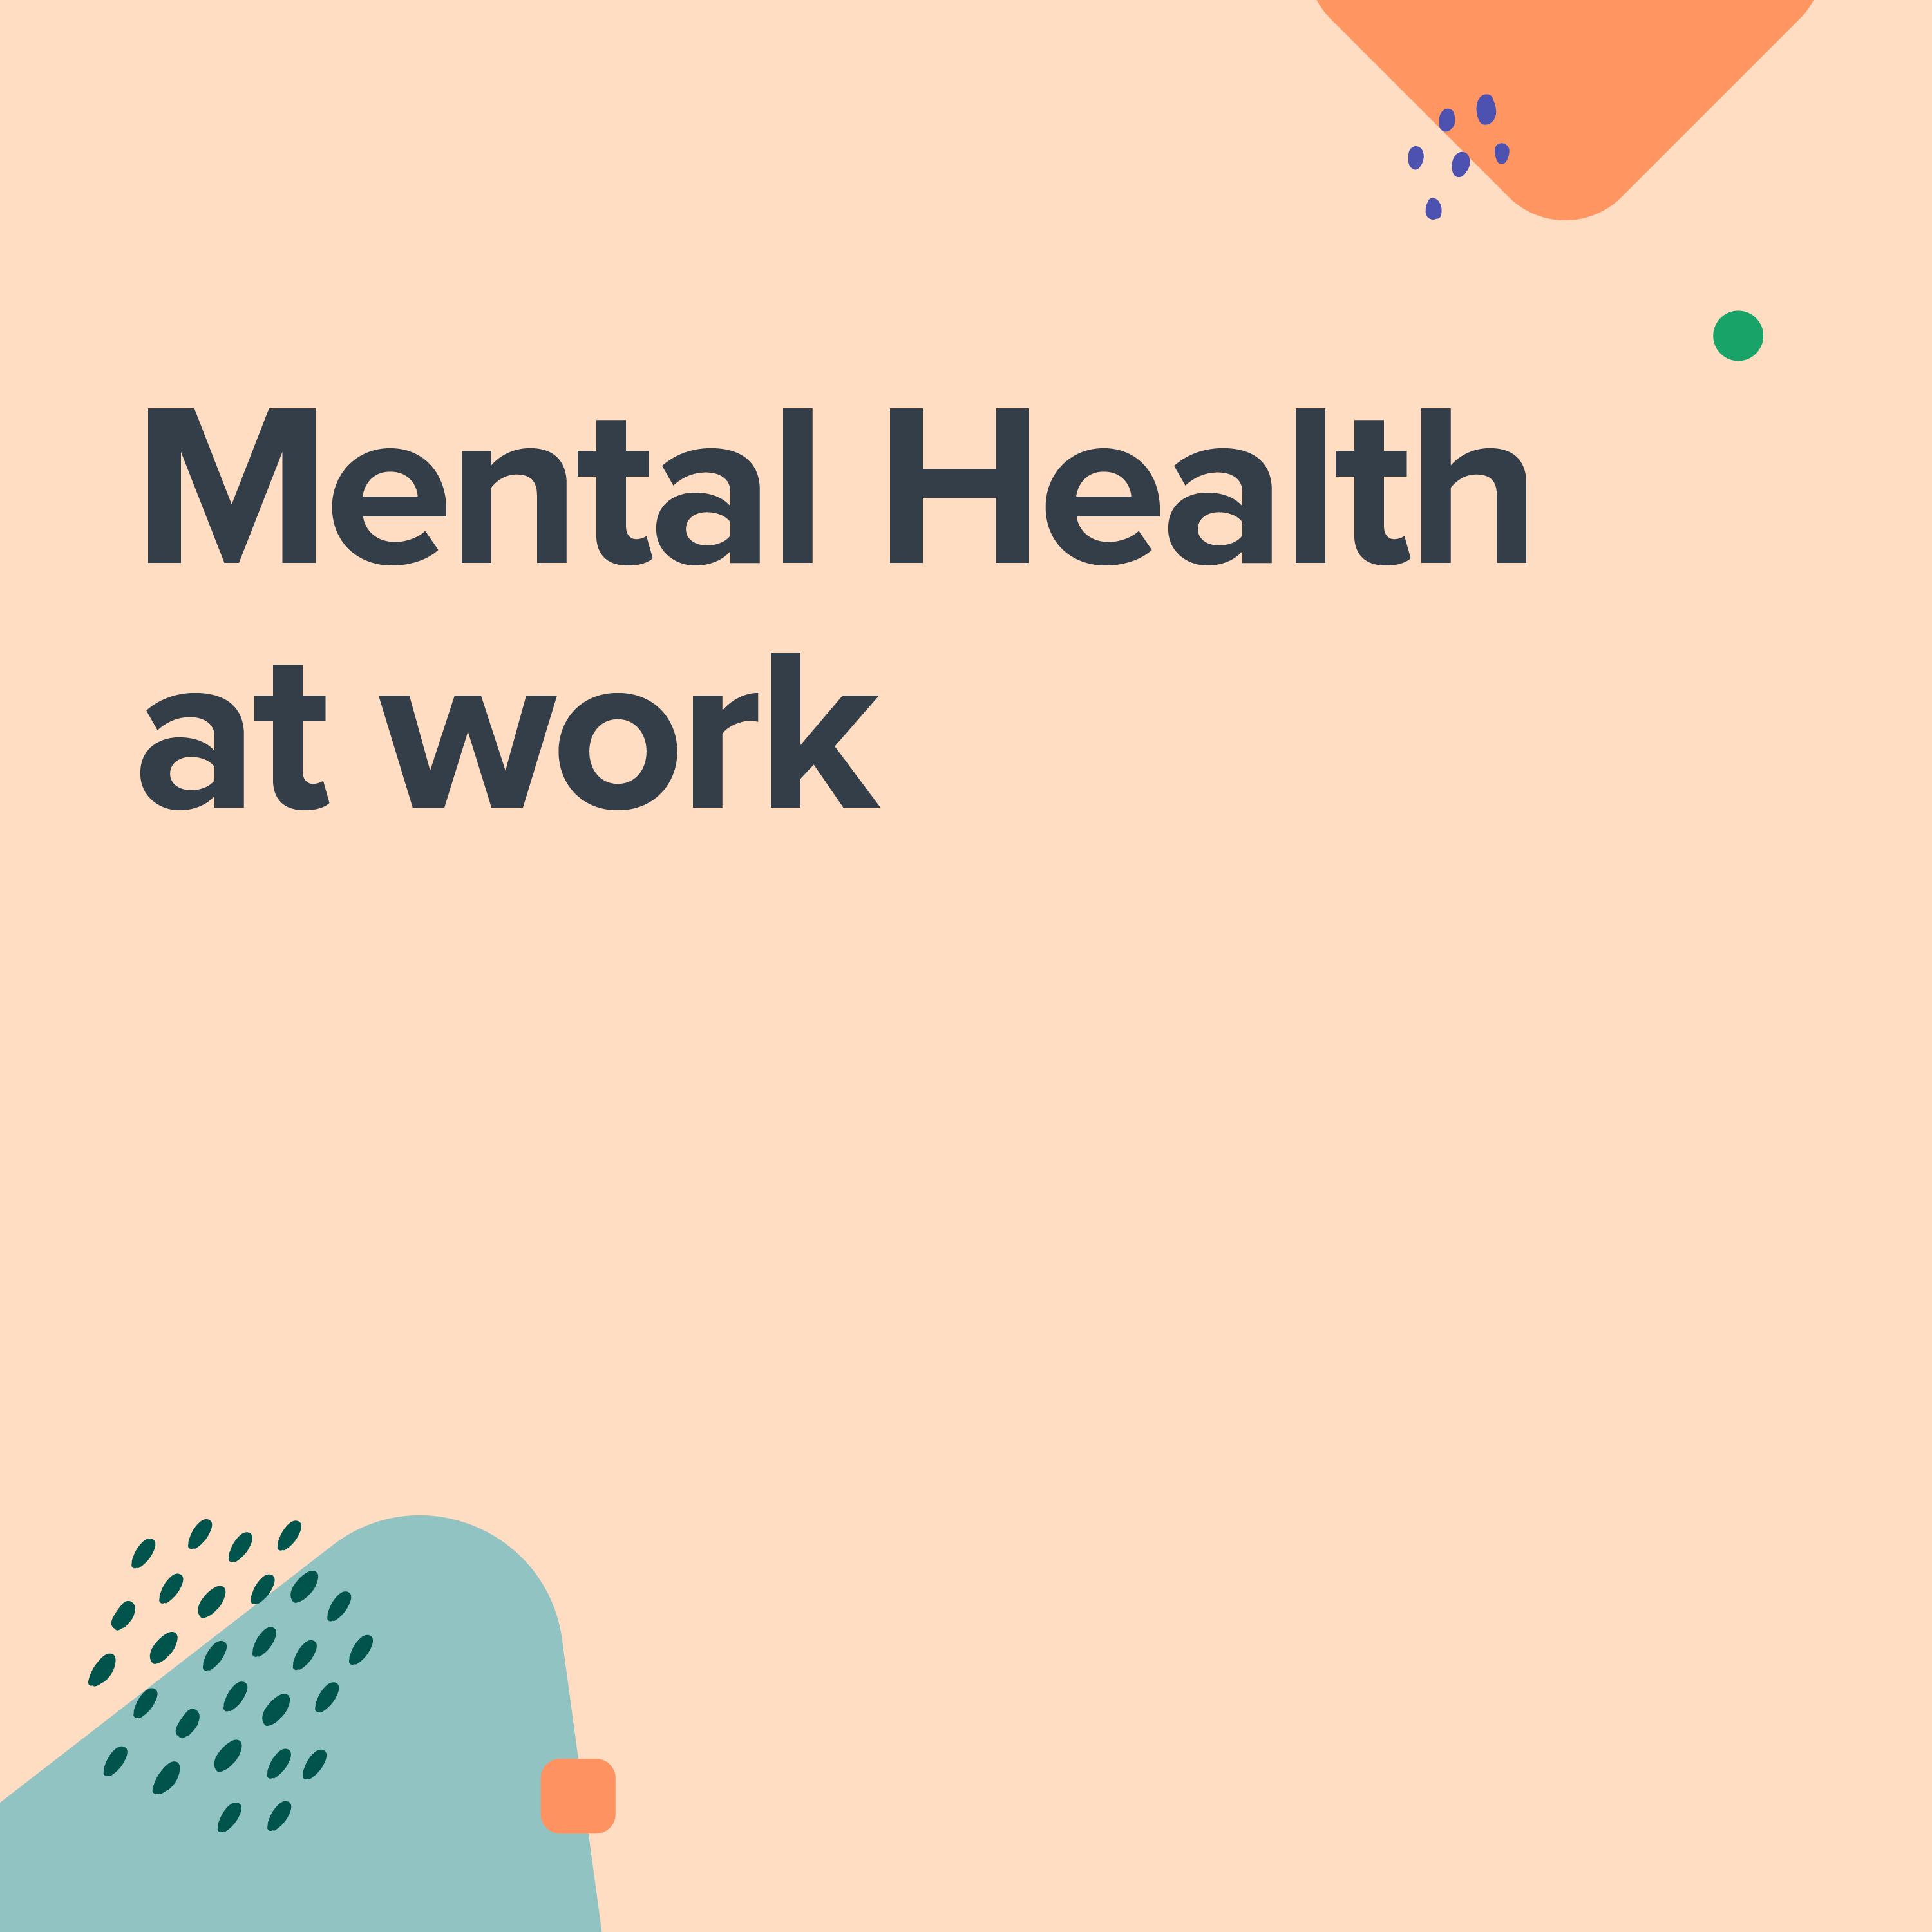 Mental Health at work: Fostering a healthier workplace culture